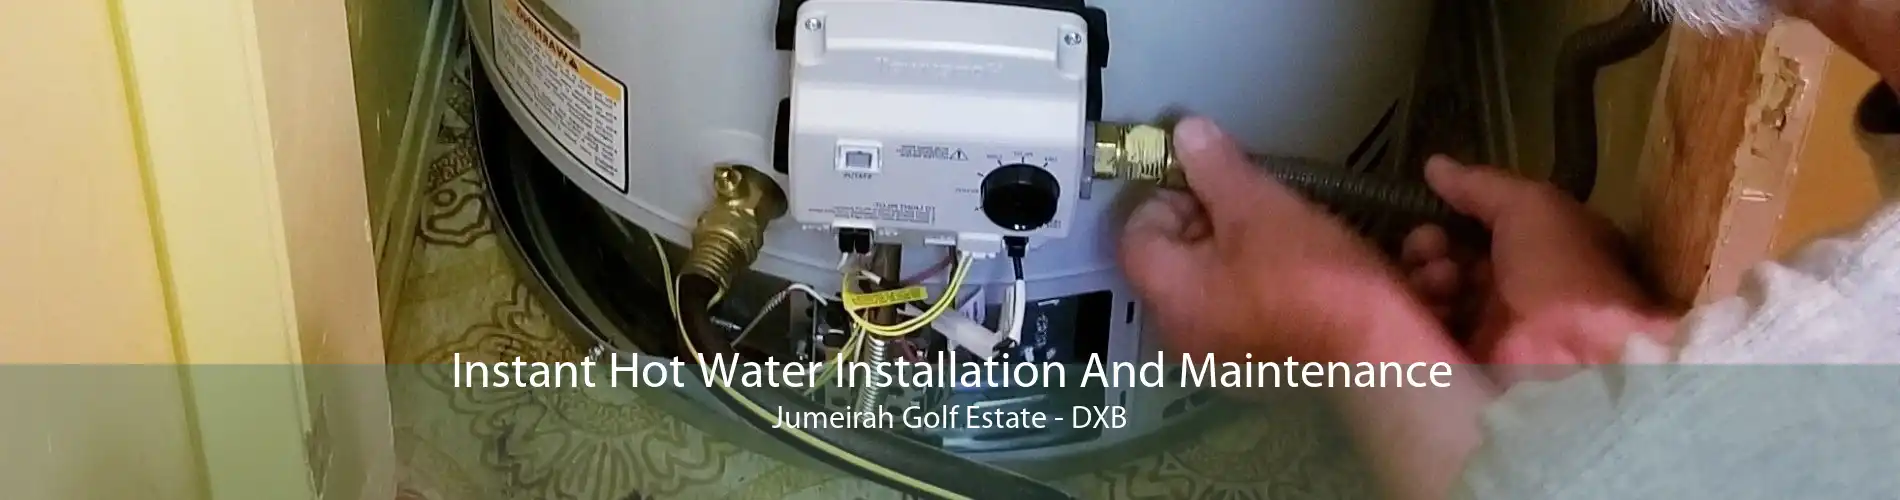 Instant Hot Water Installation And Maintenance Jumeirah Golf Estate - DXB